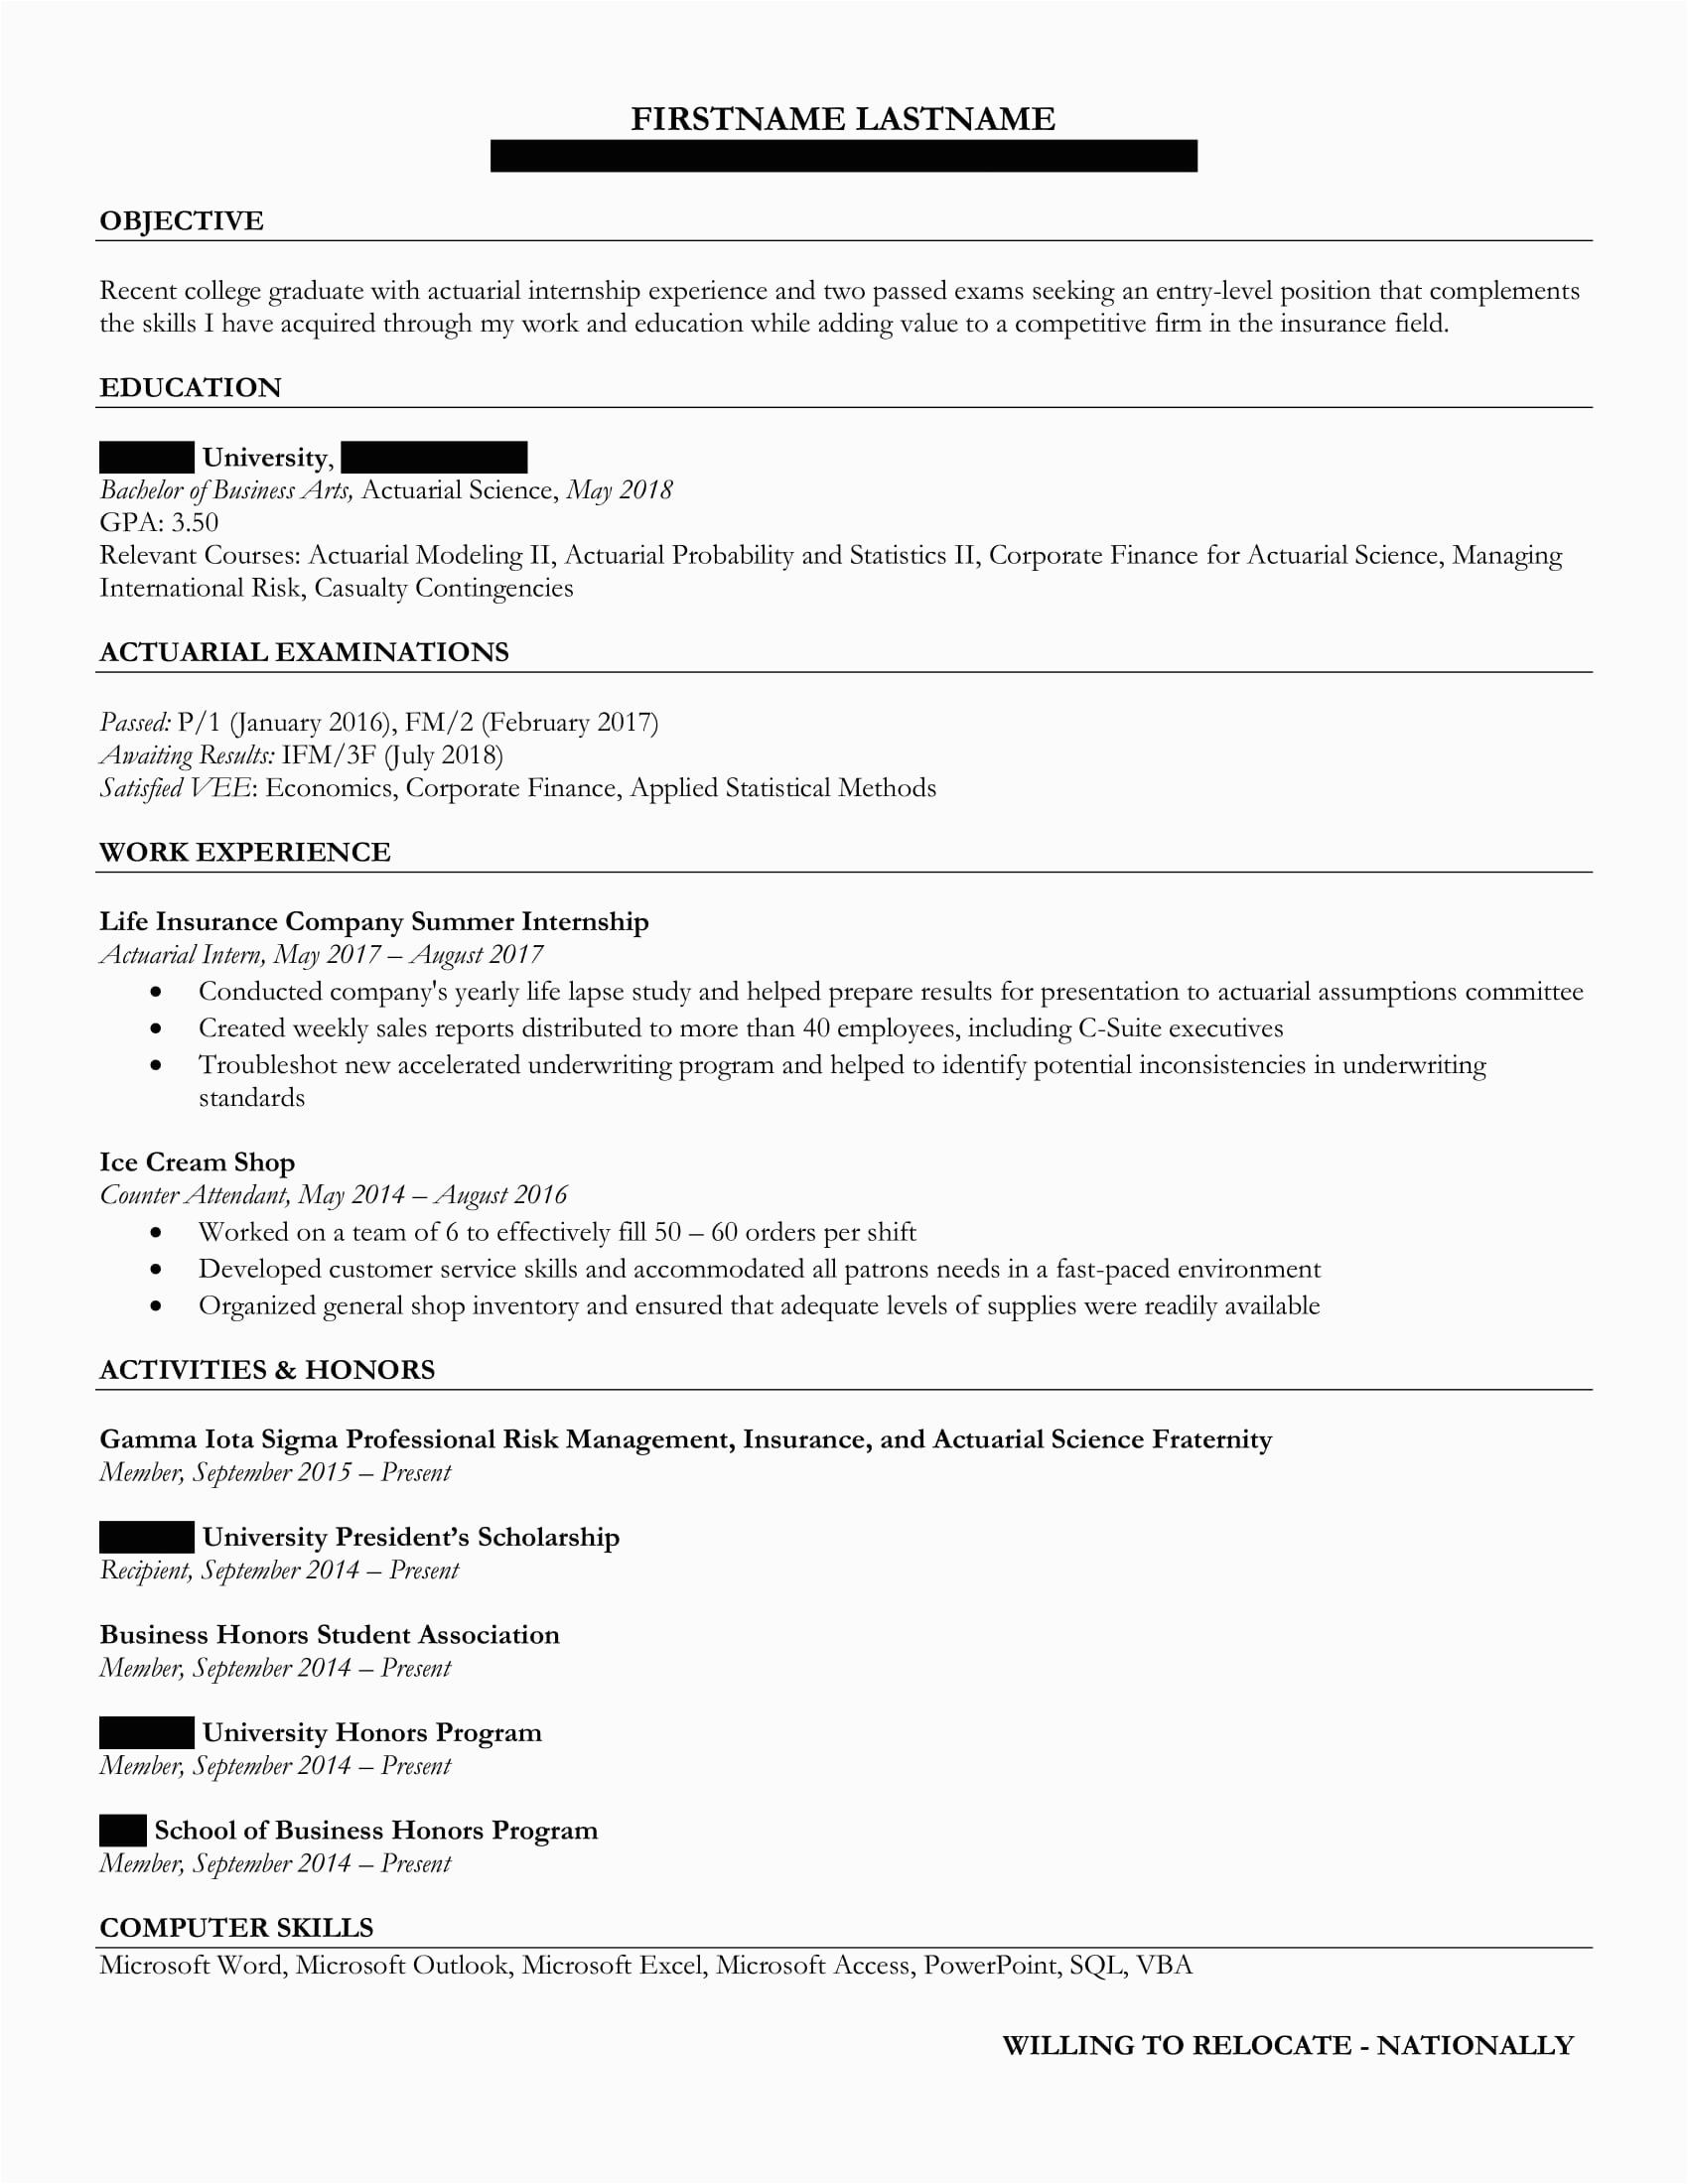 Resume Samples College Graduate Entry Level Entry Level Jobs for Recent College Graduates Resume Template Database